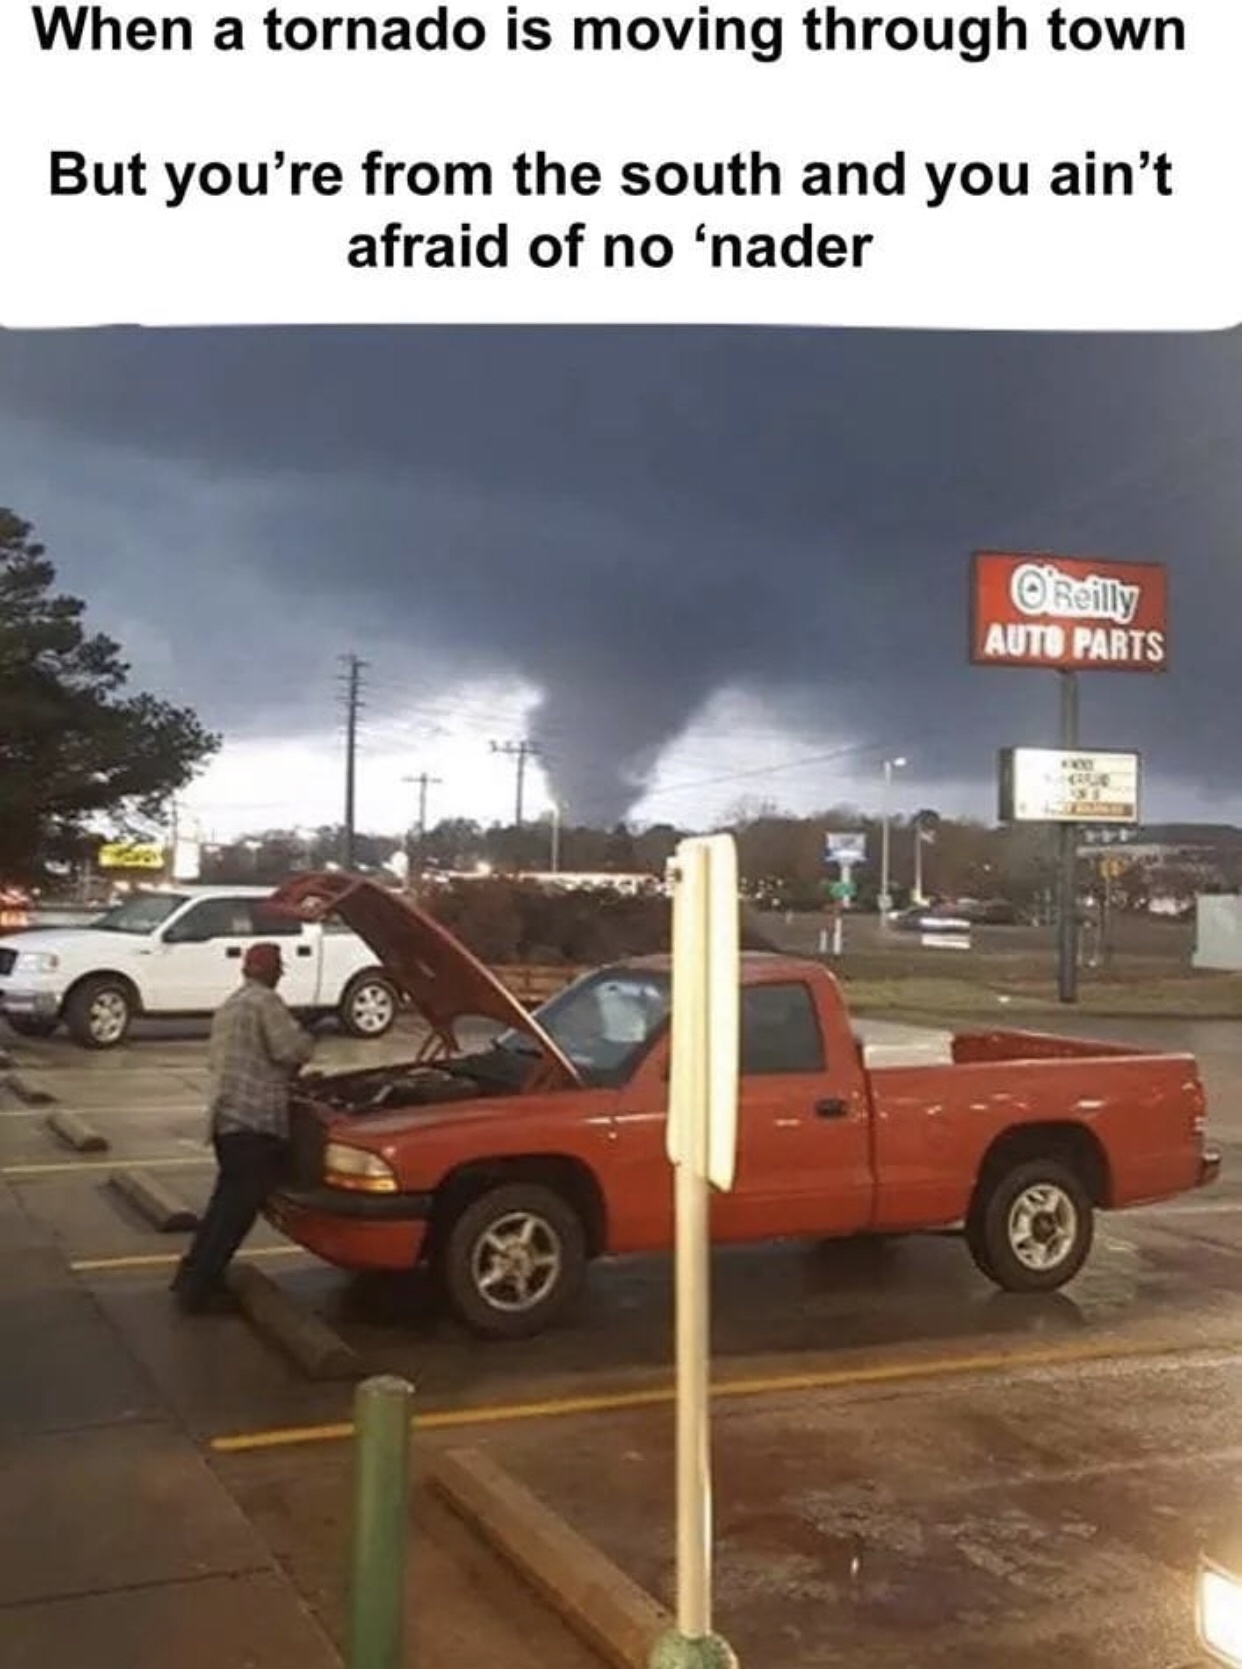 car - When a tornado is moving through town But you're from the south and you ain't afraid of no 'nader O Reilly Auto Parts